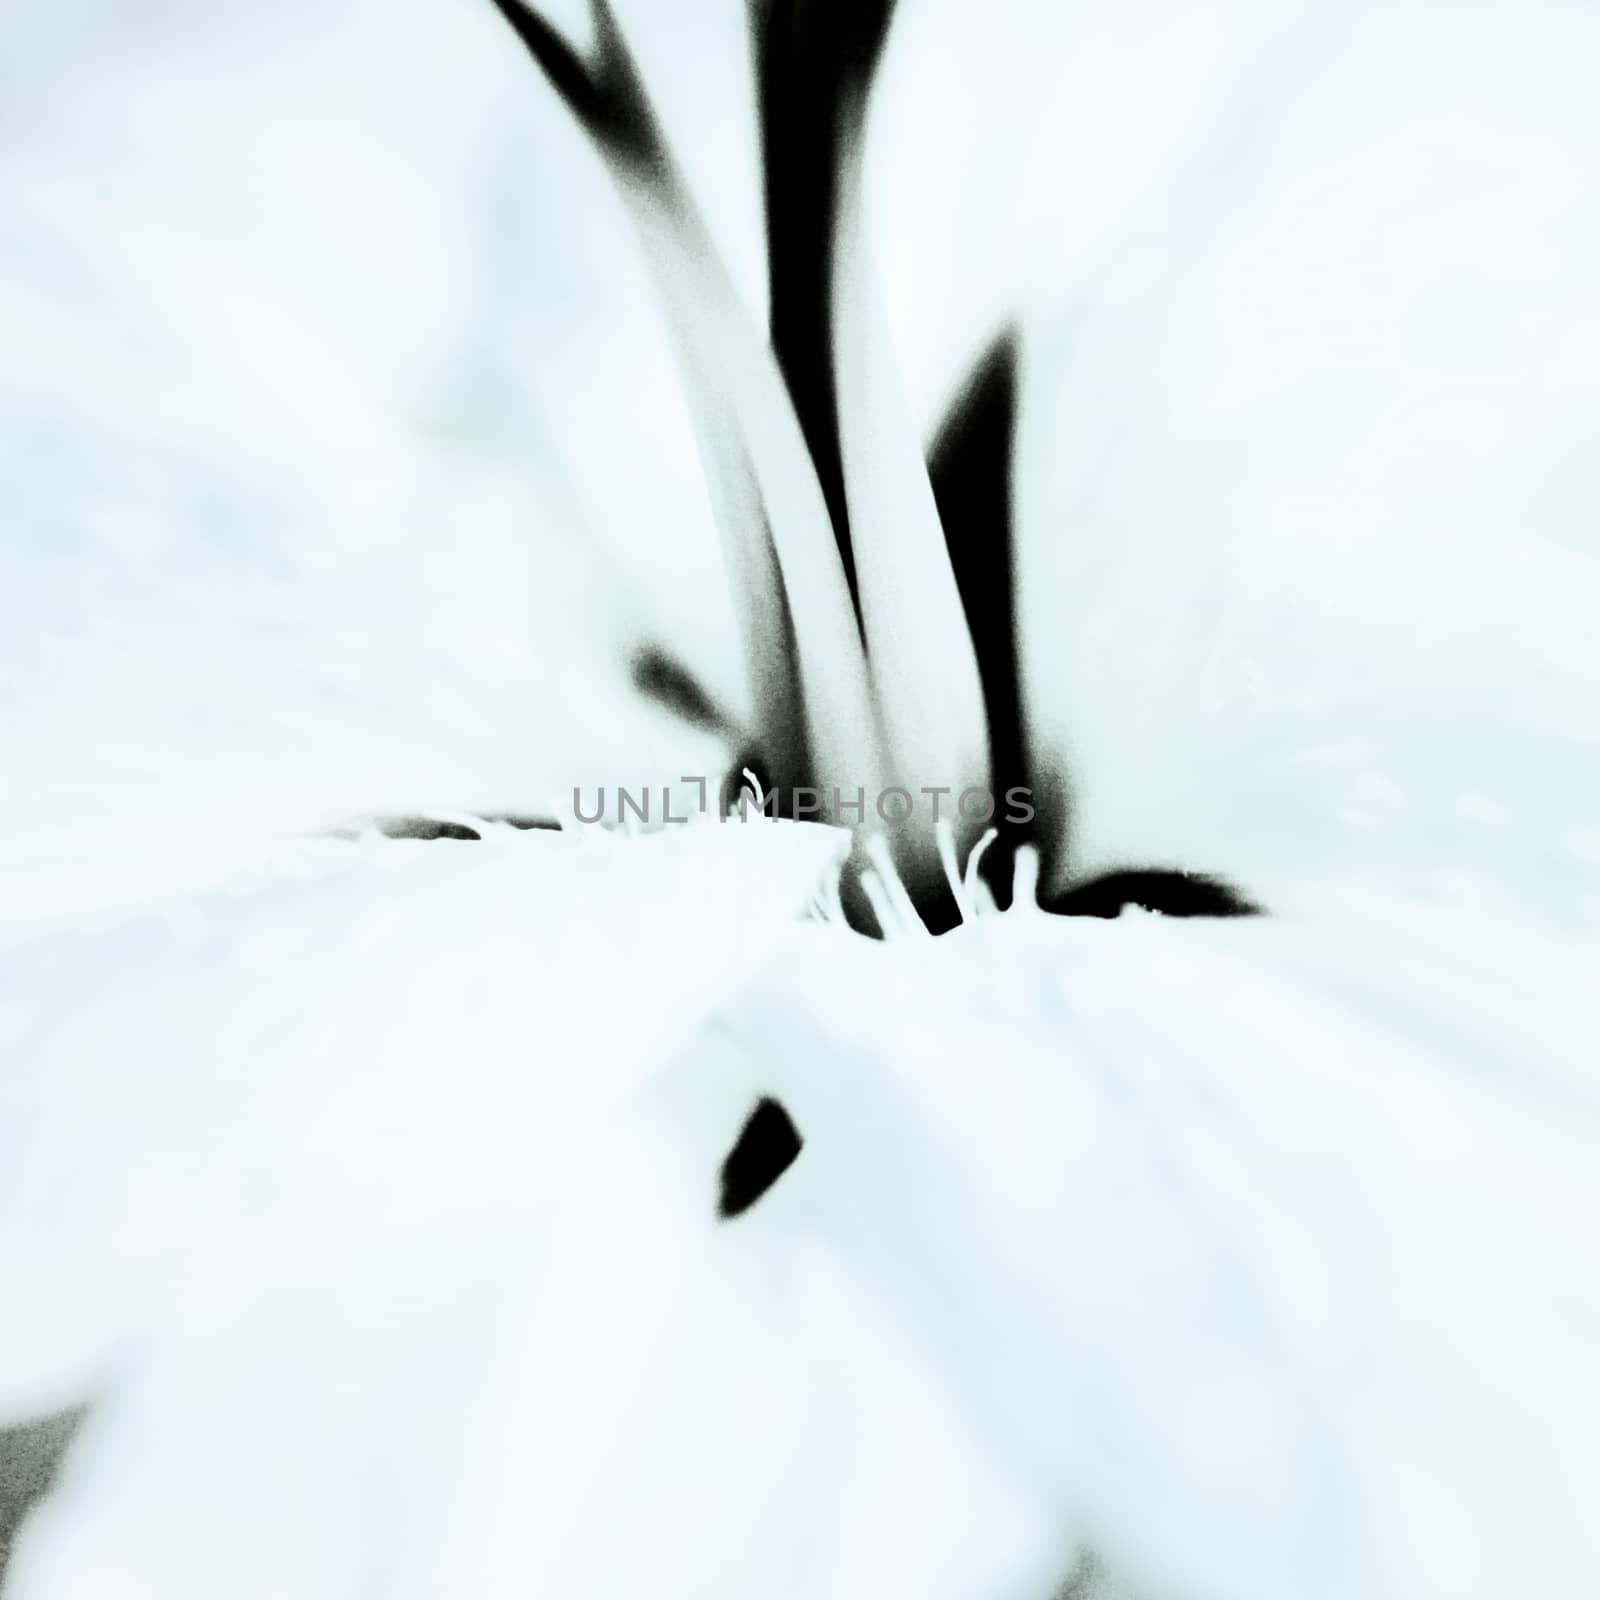 Distorted Lily by mmm